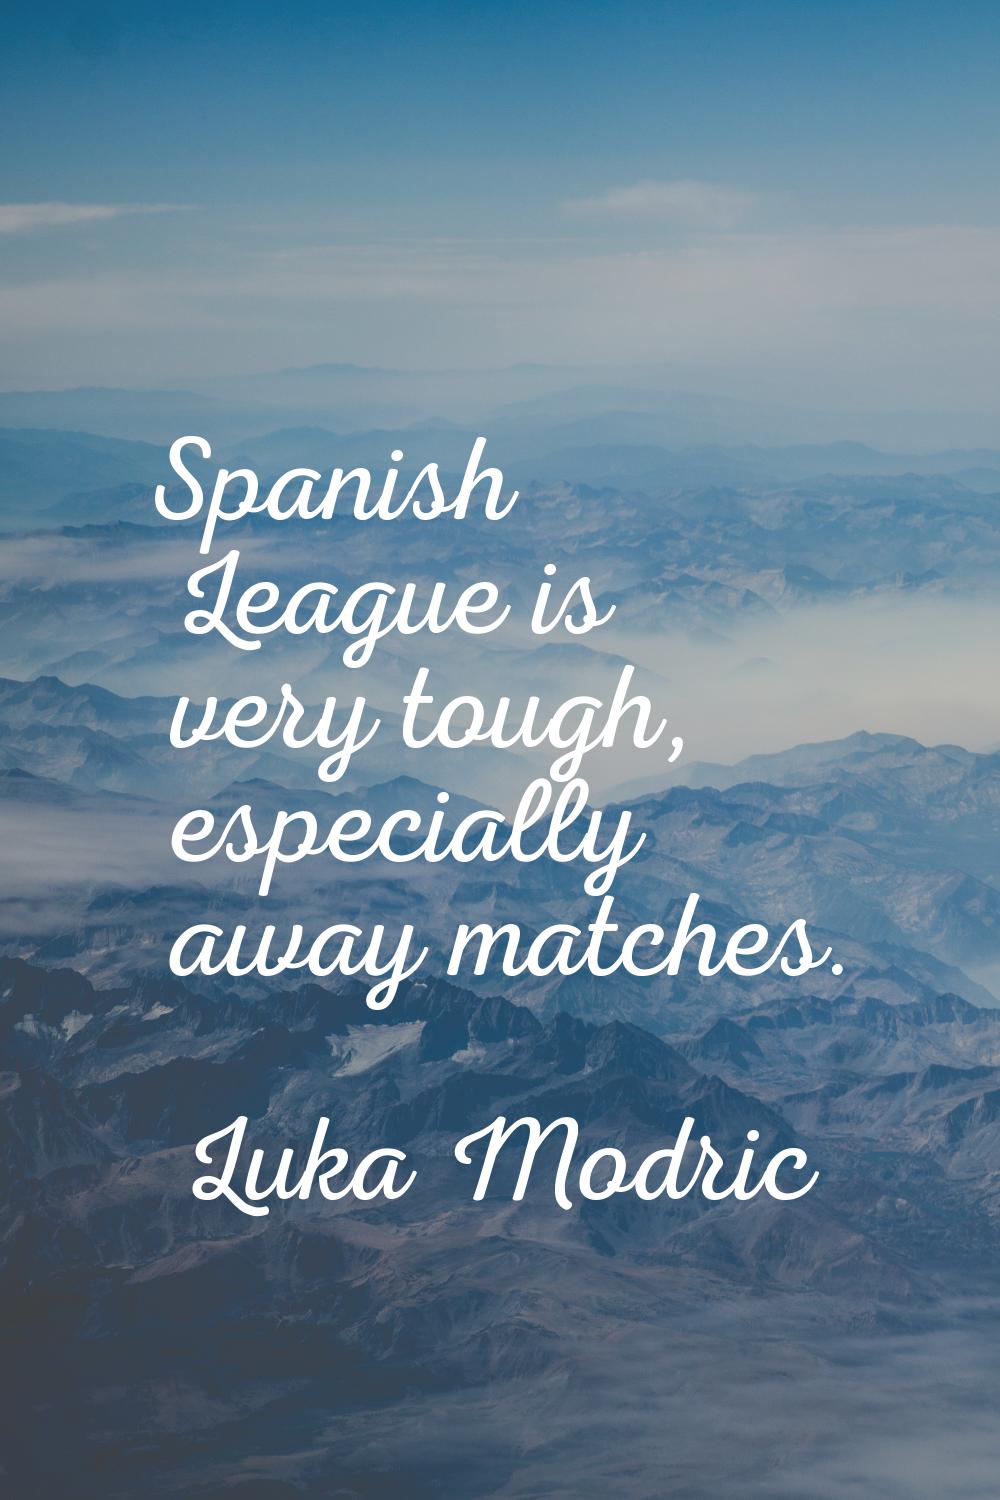 Spanish League is very tough, especially away matches.